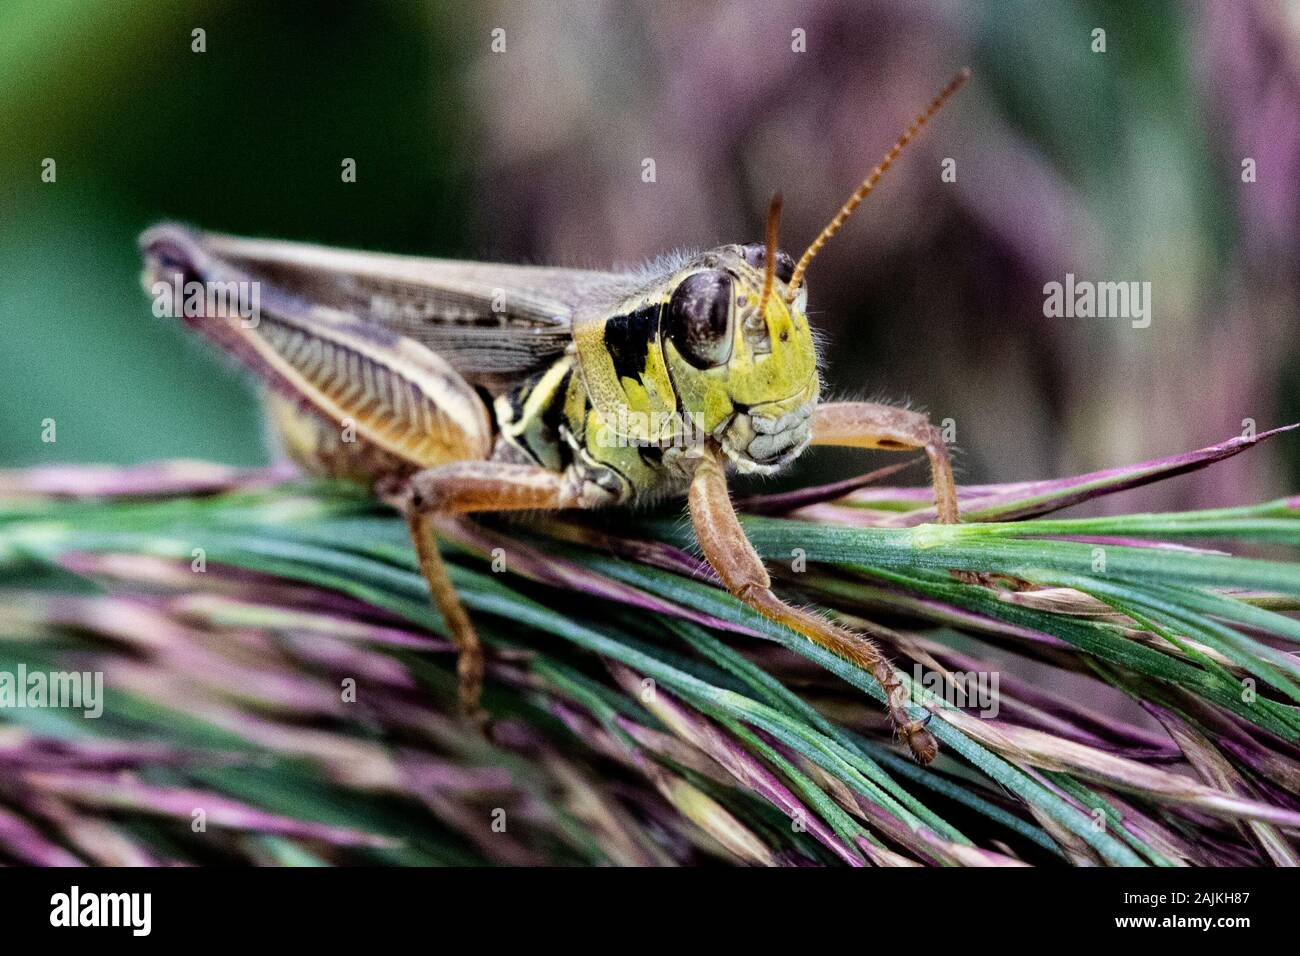 Large Grasshopper Perched on Evergreen or Pine Tree Branches in my front yard Stock Photo